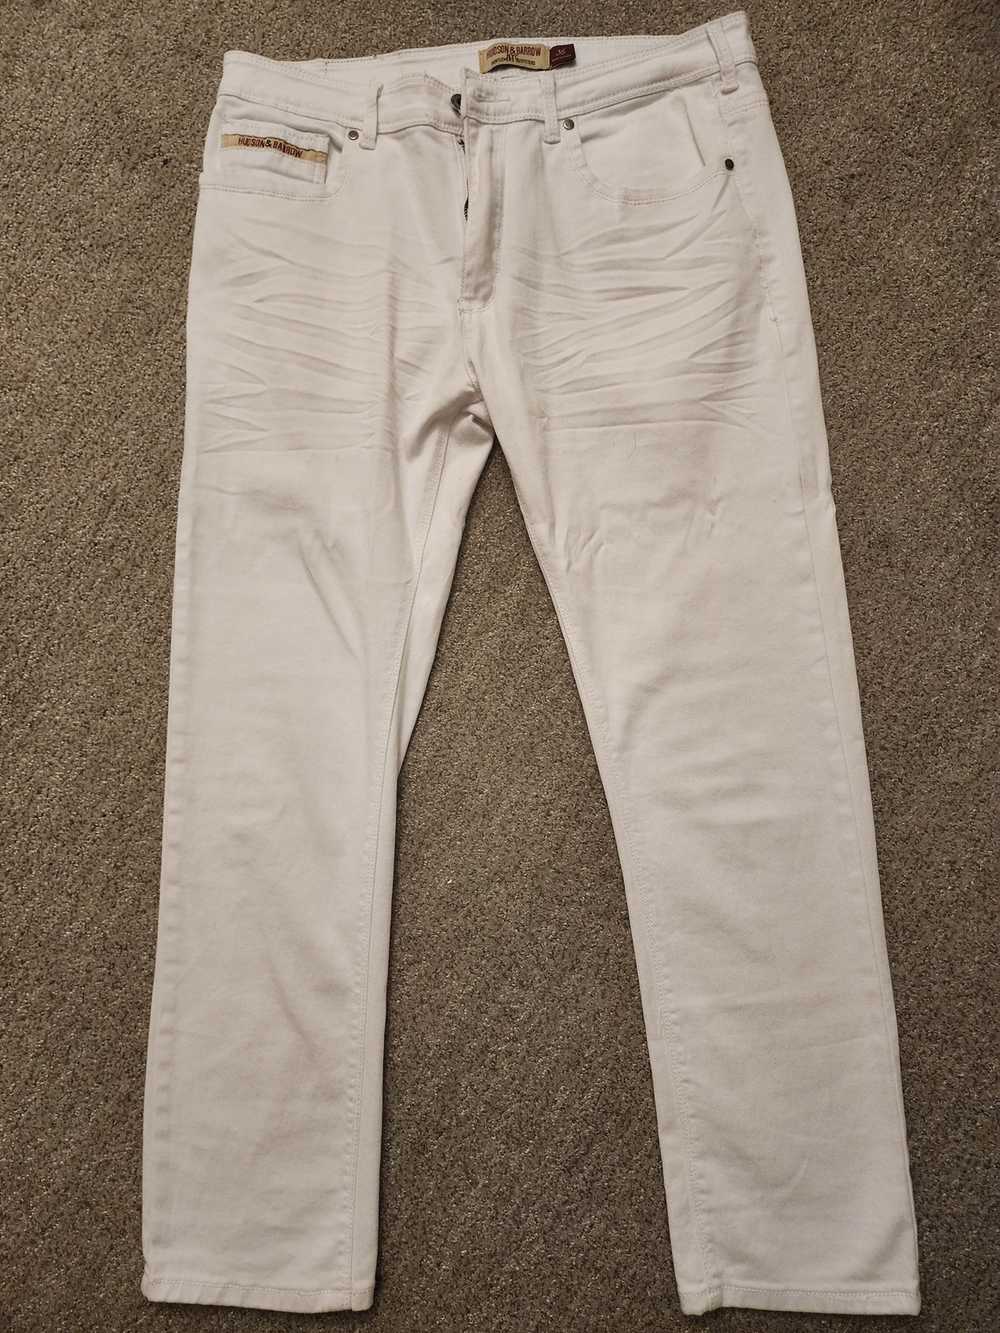 Other HUDSON AND BARROW skinny white jeans - image 4